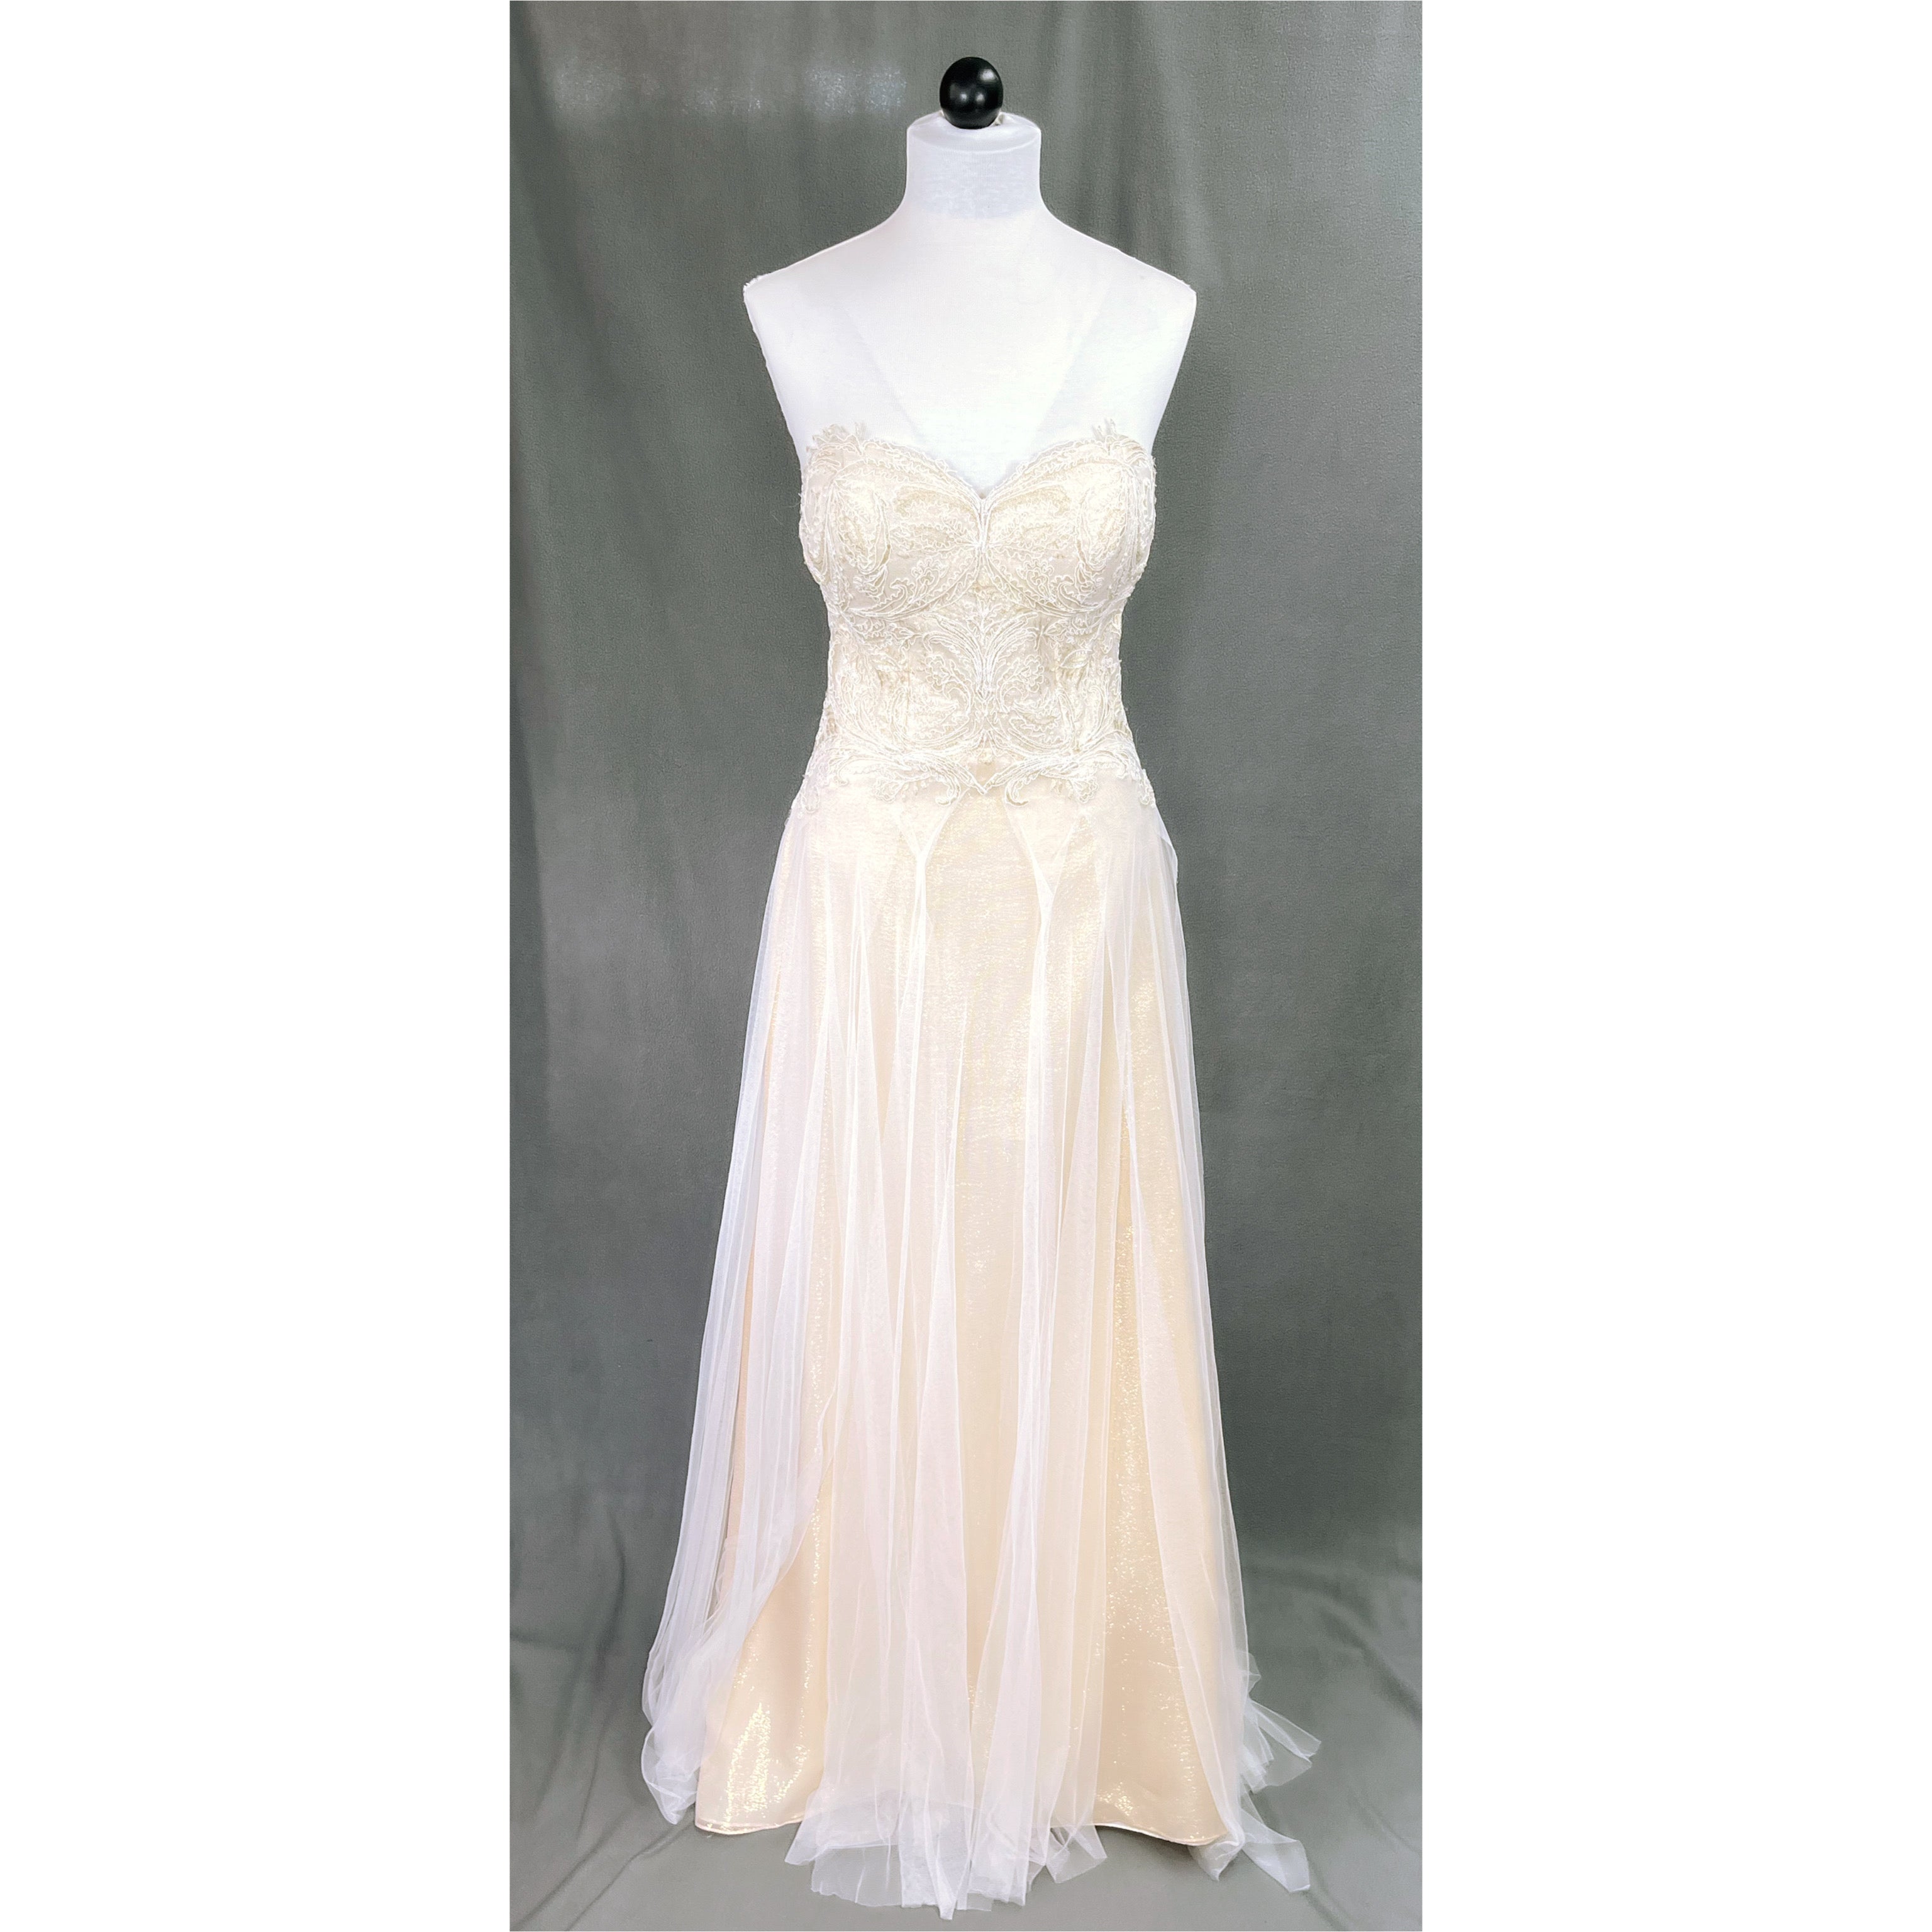 Love Marley gold and ivory dress, size 10